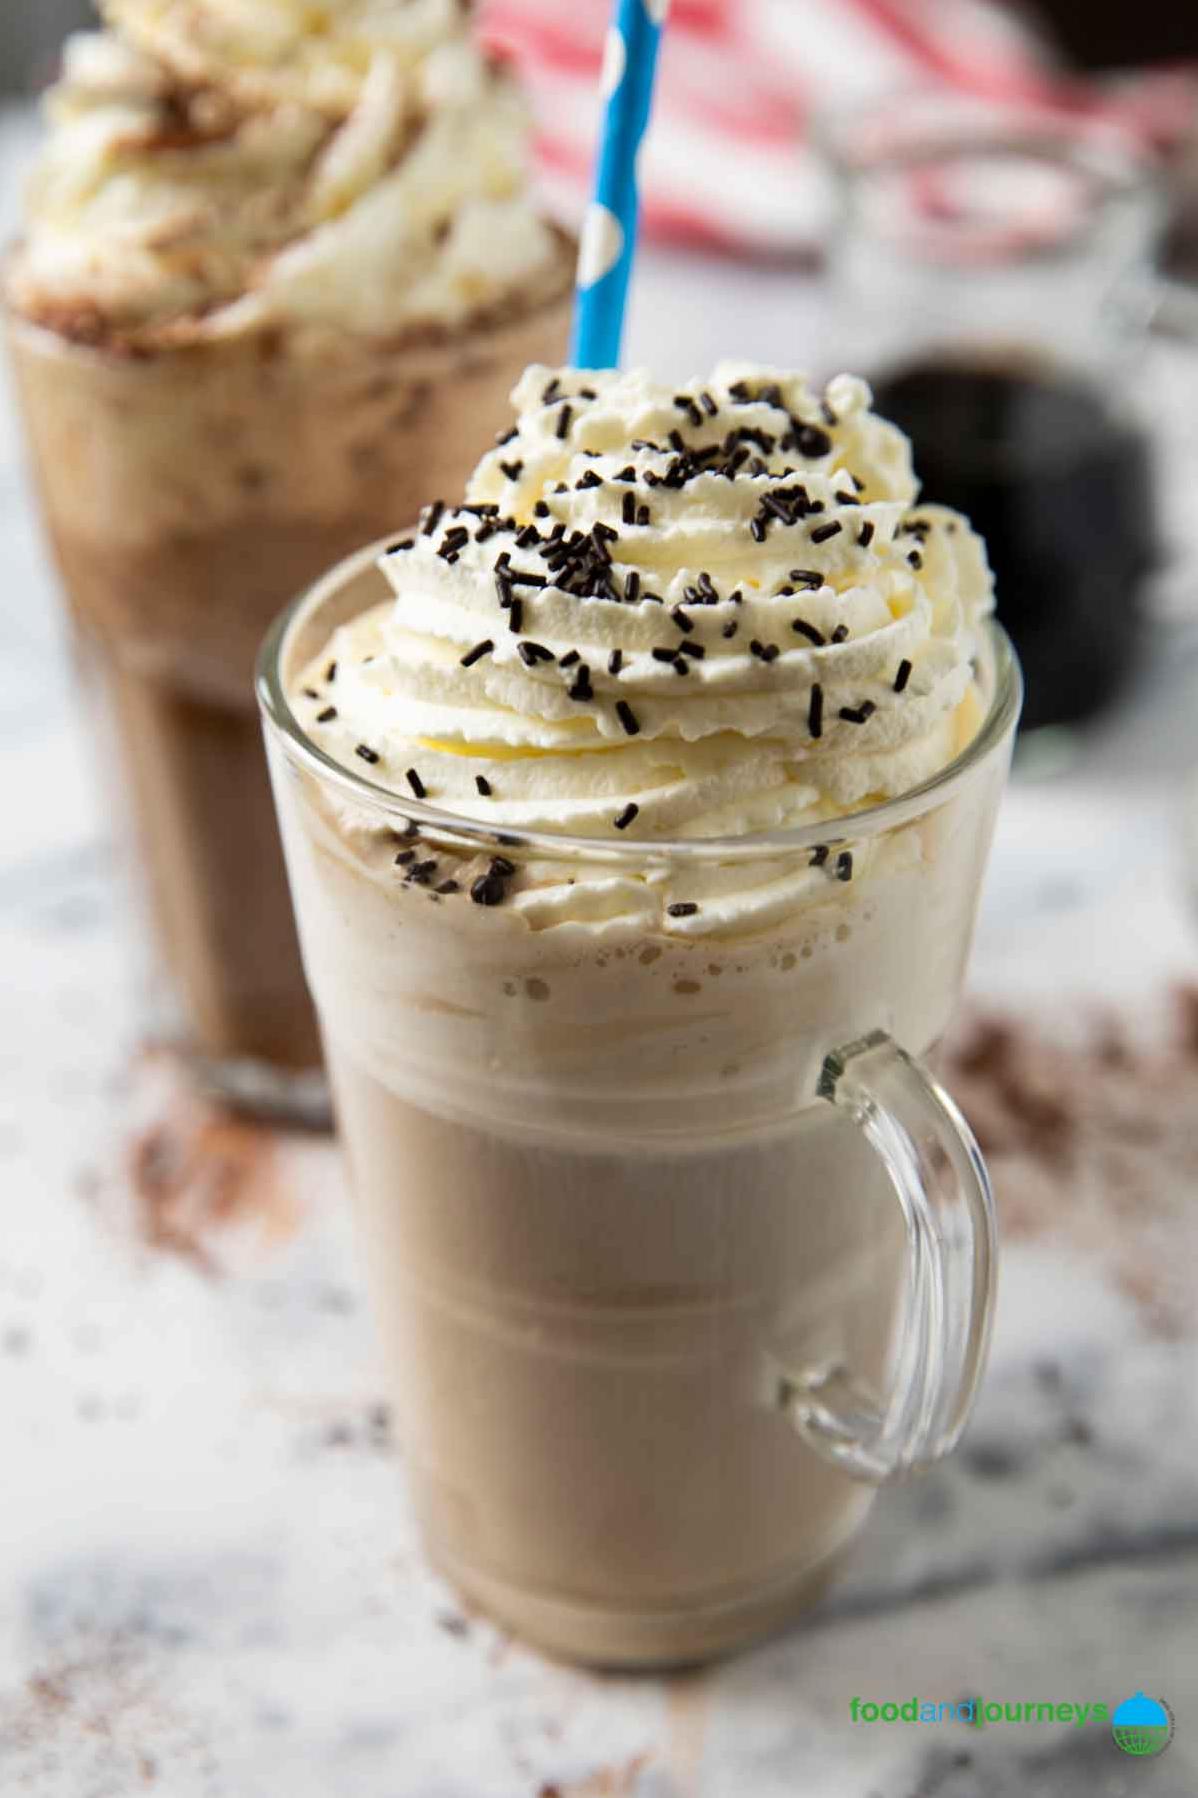  Fresh coffee, cream and a bit of magic – that's all you need for this wonderful beverage.